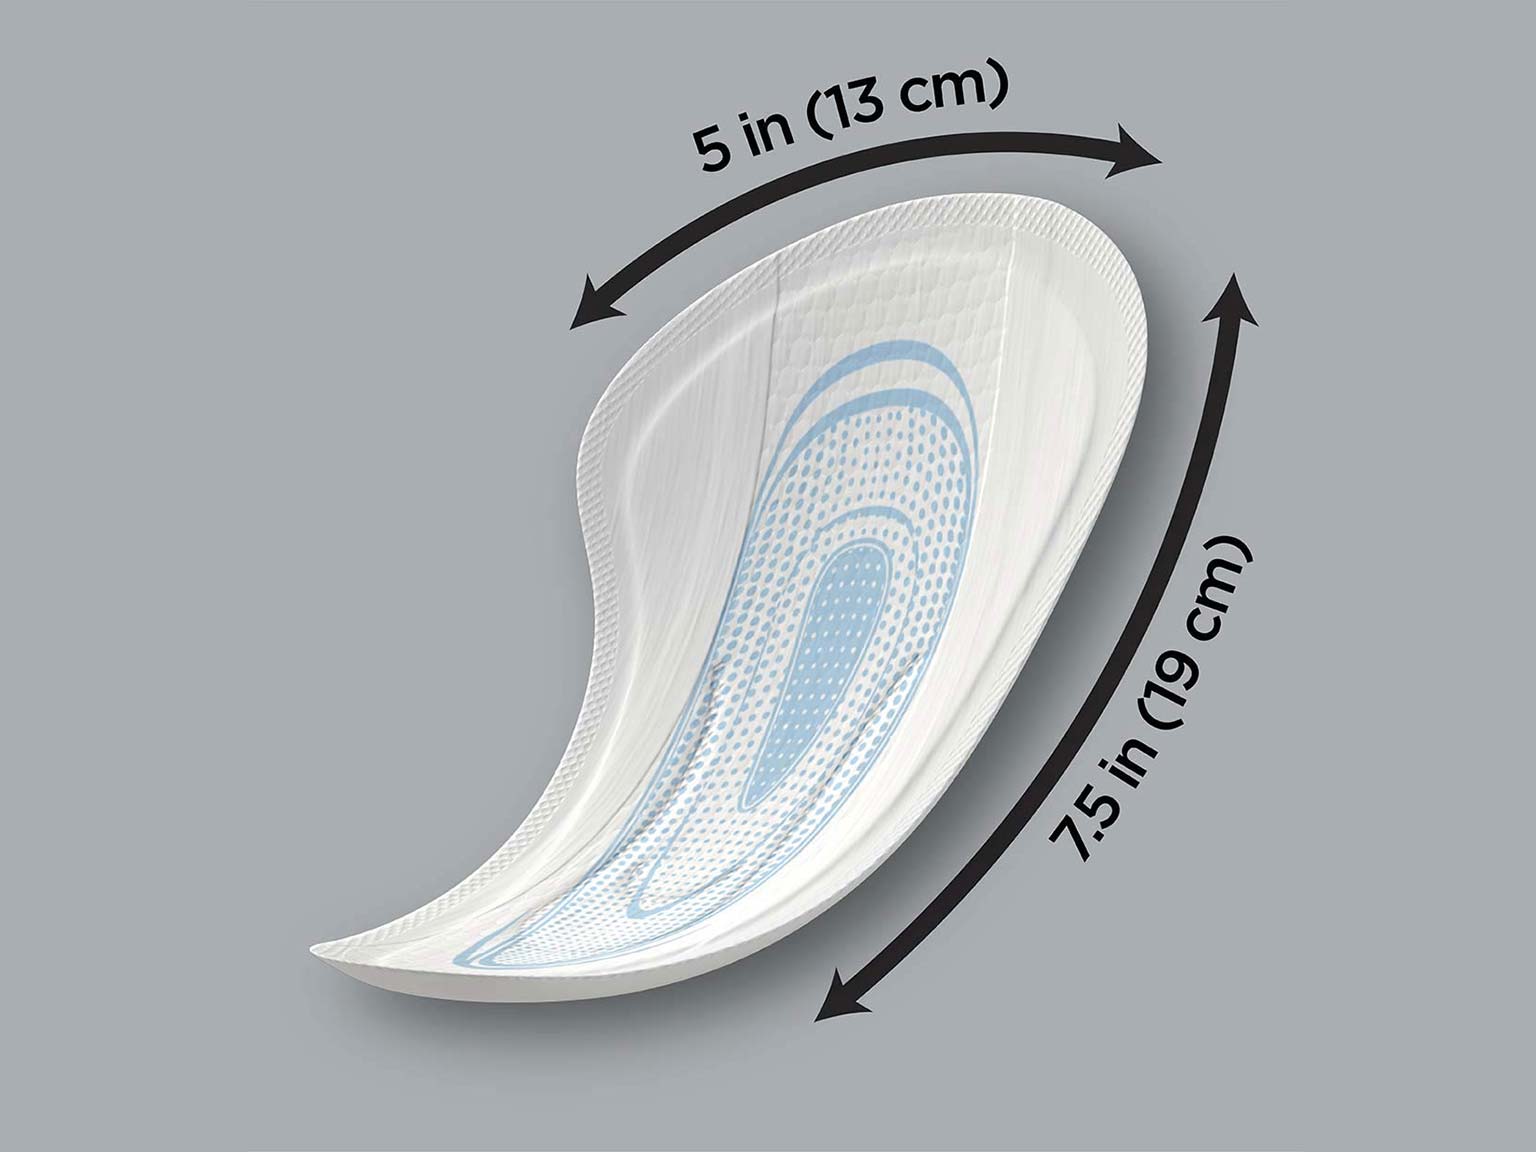 Depend® Incontinence Shields for Men Sizing